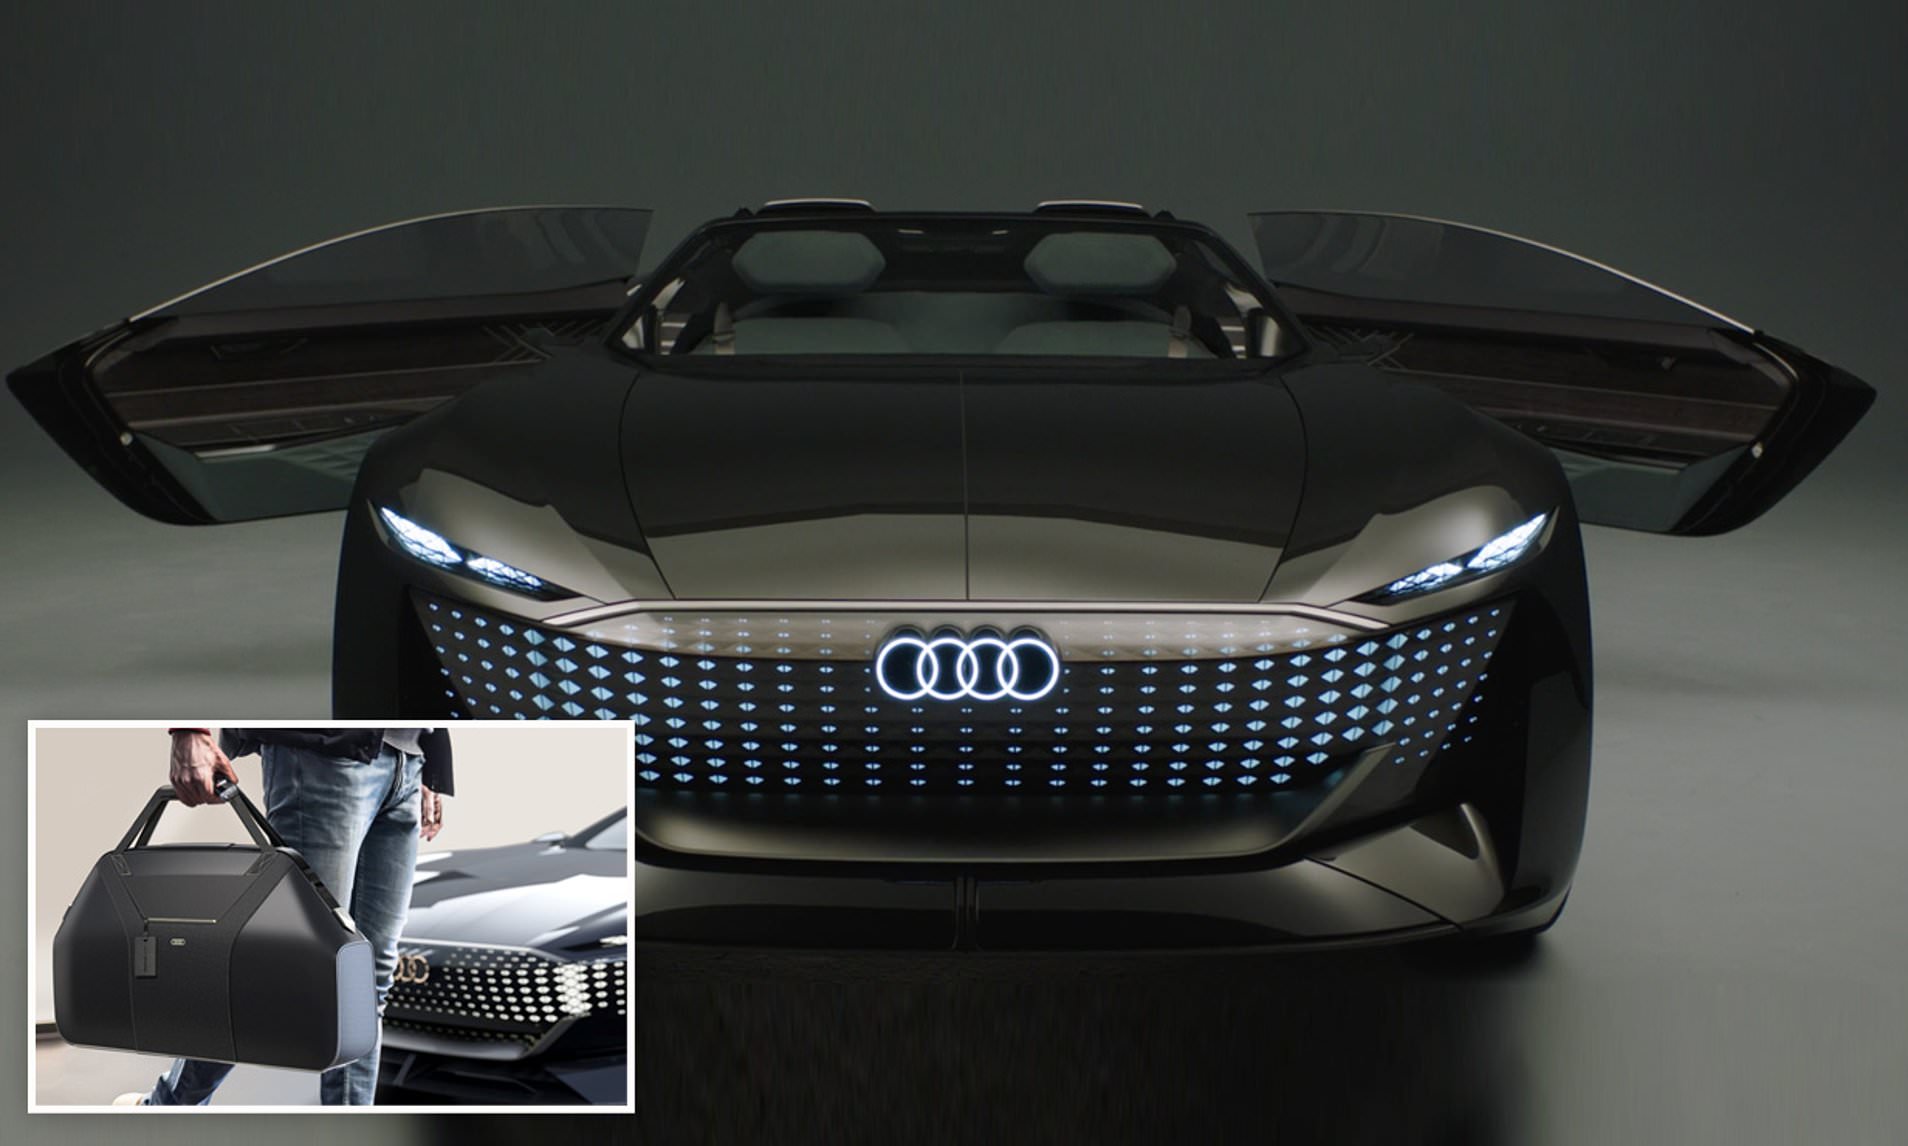 Audi unveils its new futuristic 'transforming' Skysphere EV roadster which can change size and has a retractable steering wheel